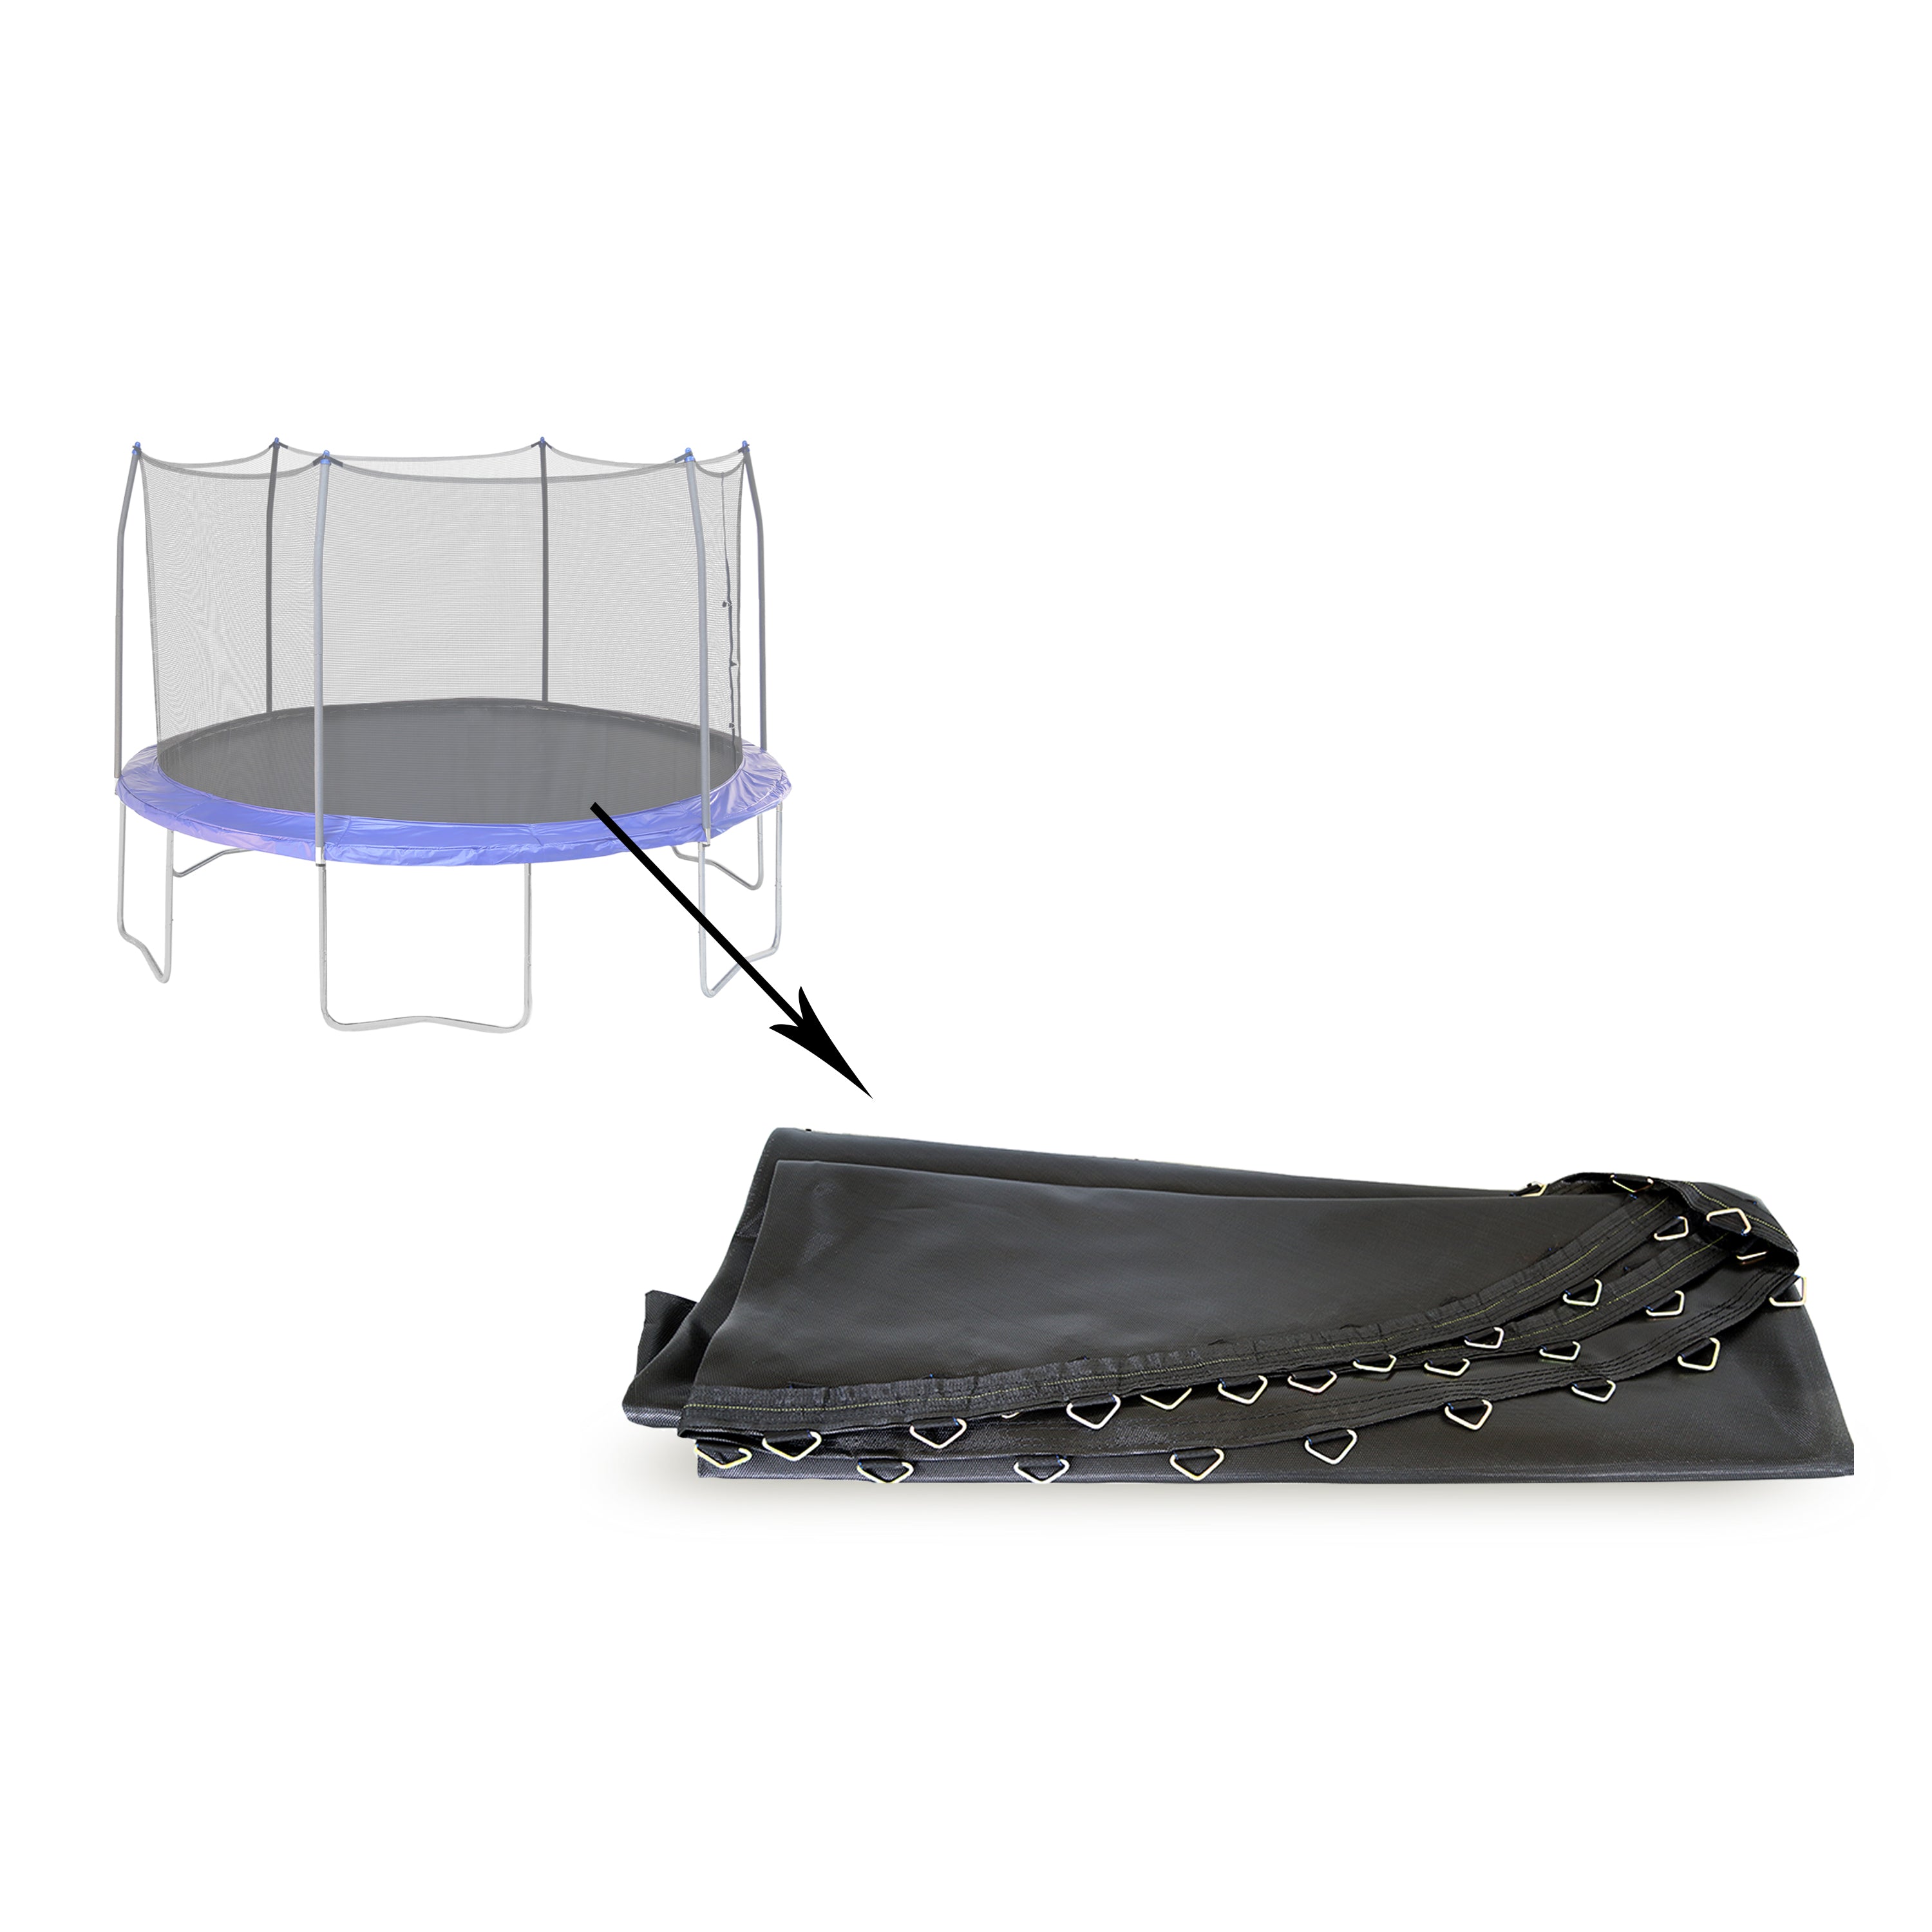 Black jumping mat designed for 13-foot round trampolines. 